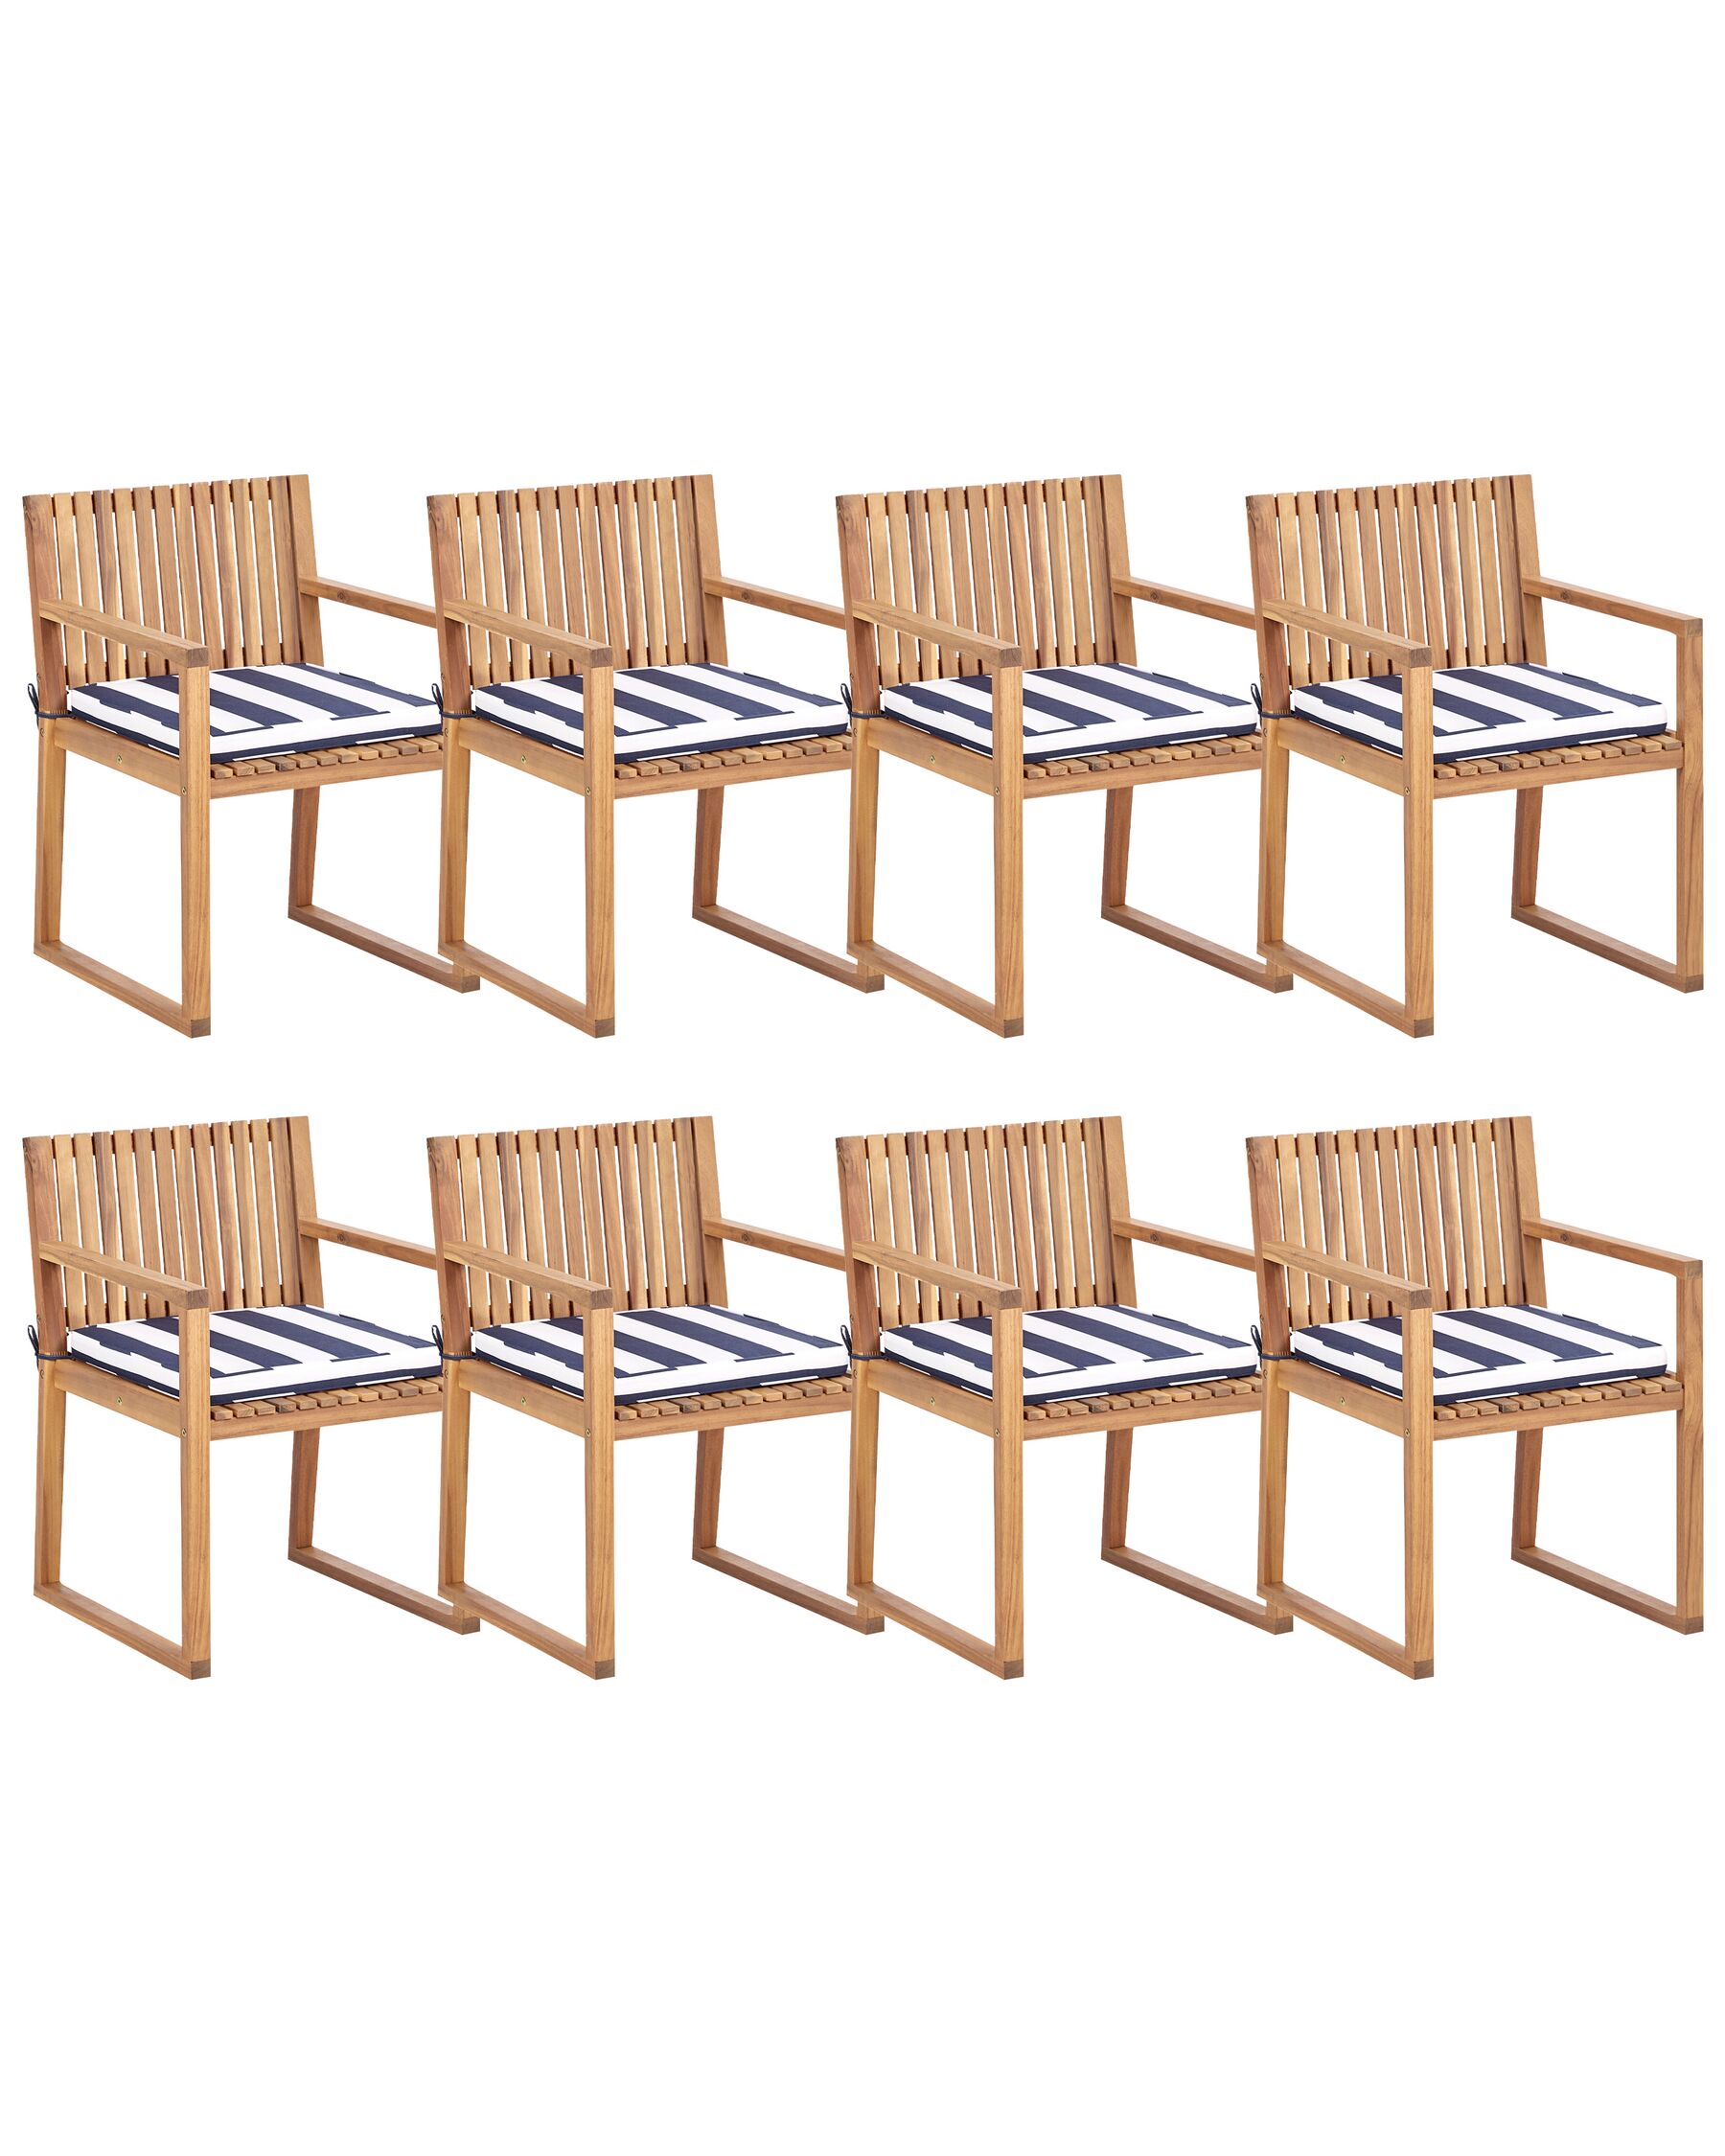 Set of 8 Certified Acacia Wood Garden Dining Chairs with Navy Blue and White Cushions SASSARI II_923931